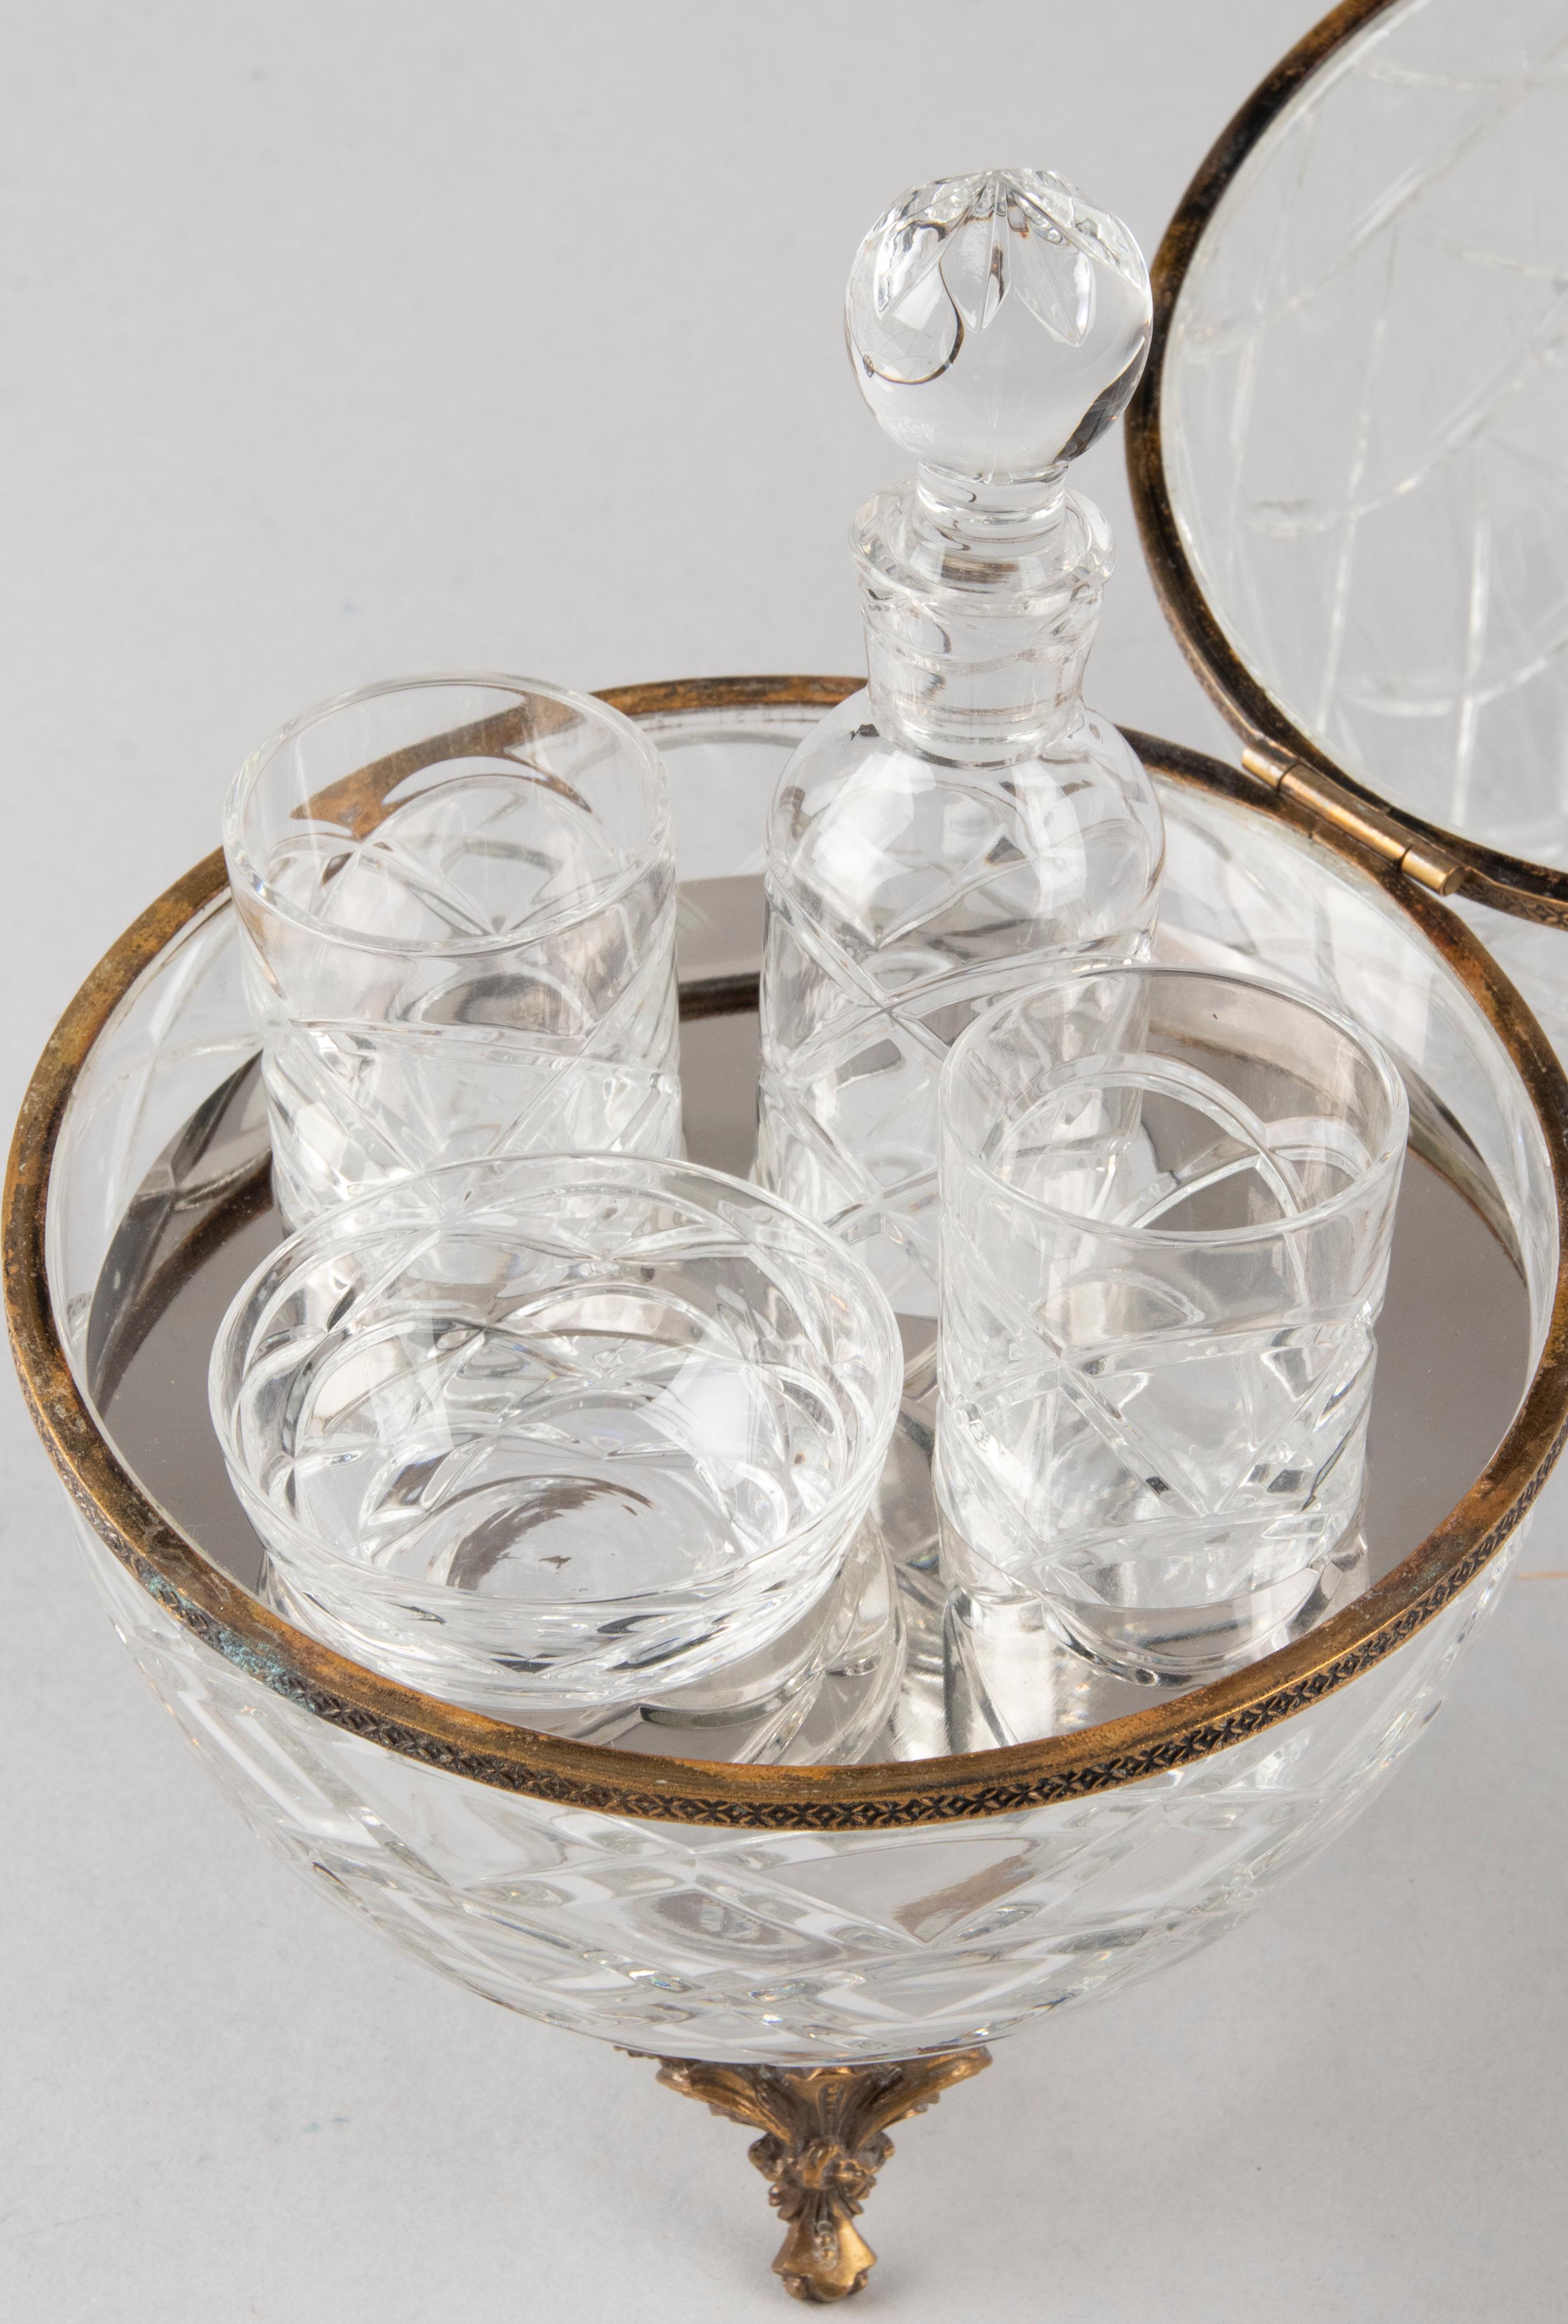 French Mid-Century Modern Crystal Egg for Caviar and Vodka Made by Fabergé